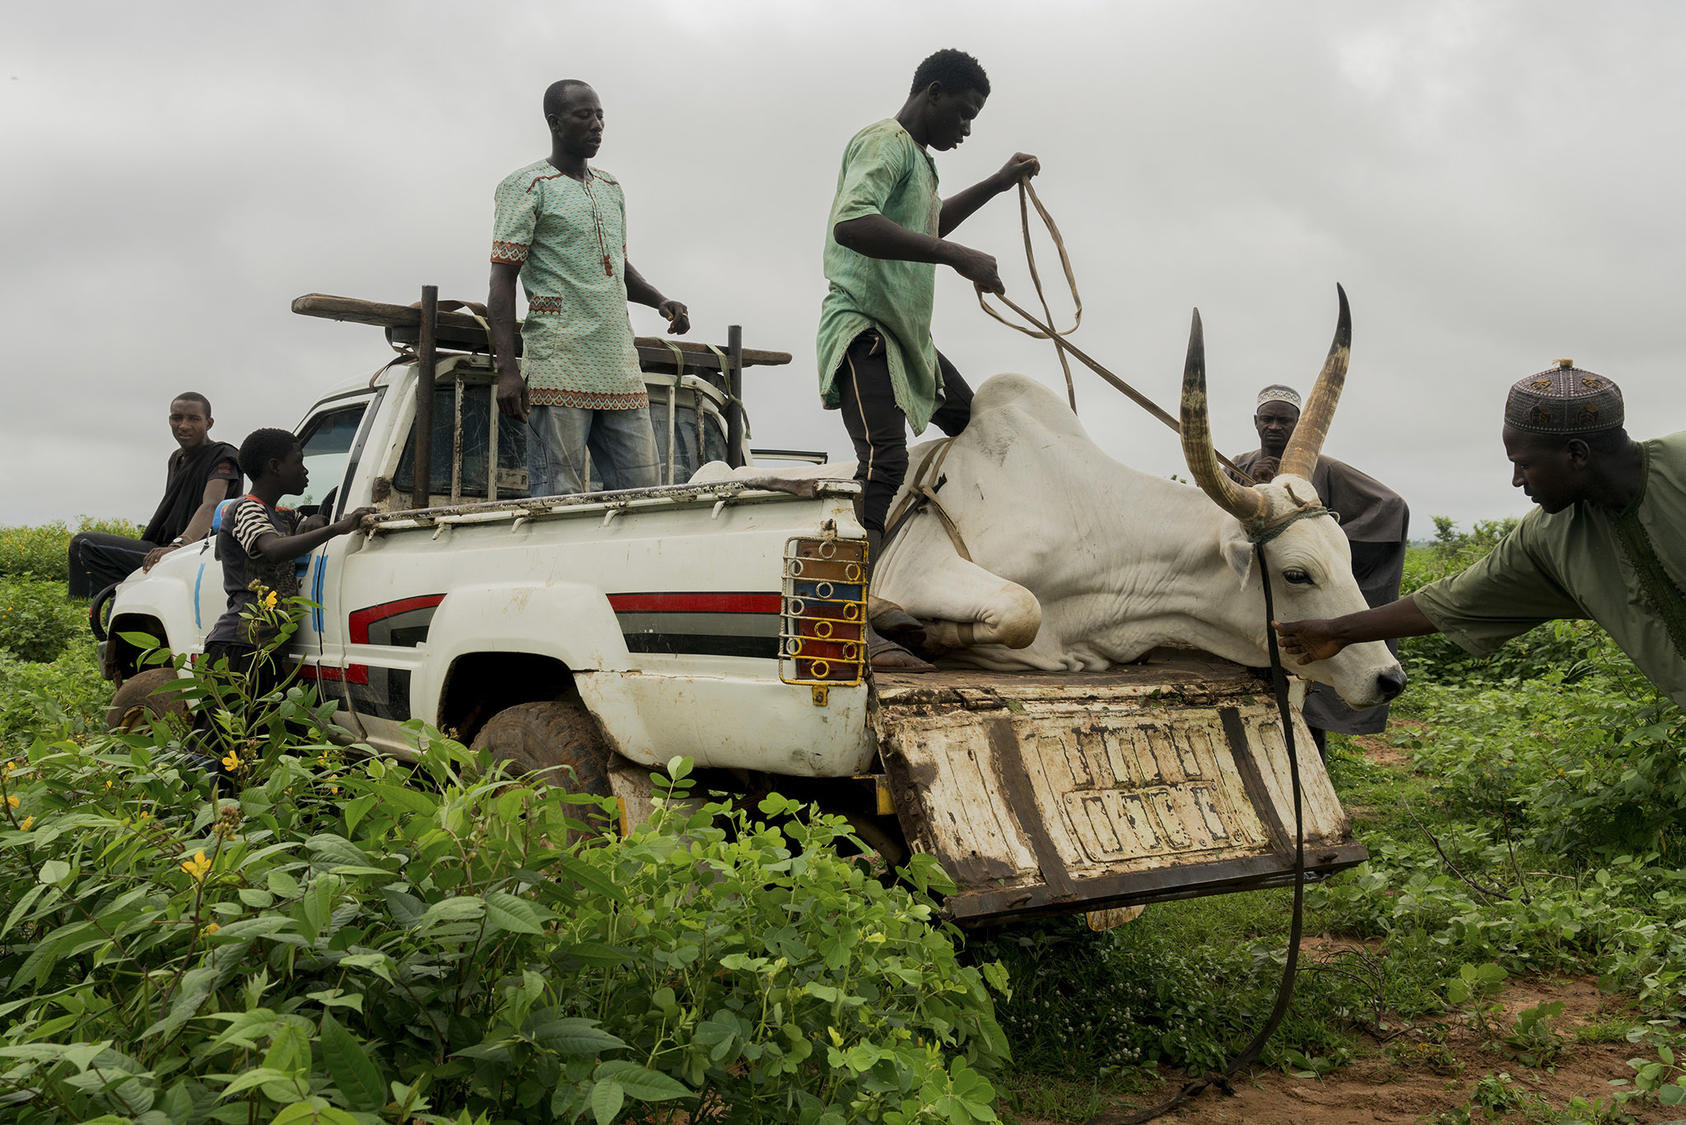 Nigerians load a cow to be sold at a market in 2018. Farming and herding communities have fought escalating battles for land and water — one of the many conflicts roiling Nigeria in recent years. (Adriane Ohanesian/The New York Times)